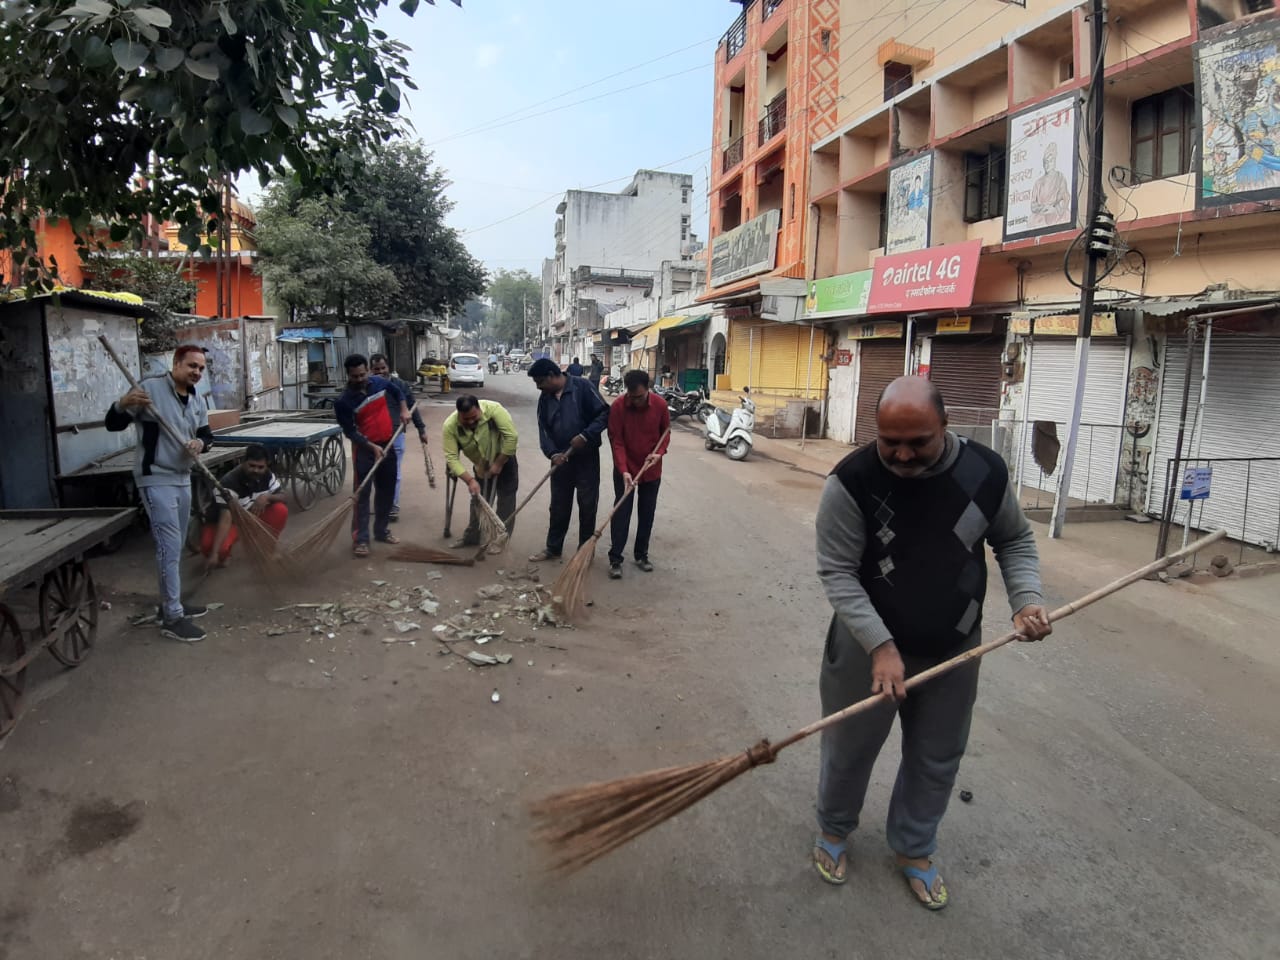 Businessmen came forward to see the collector cleaning